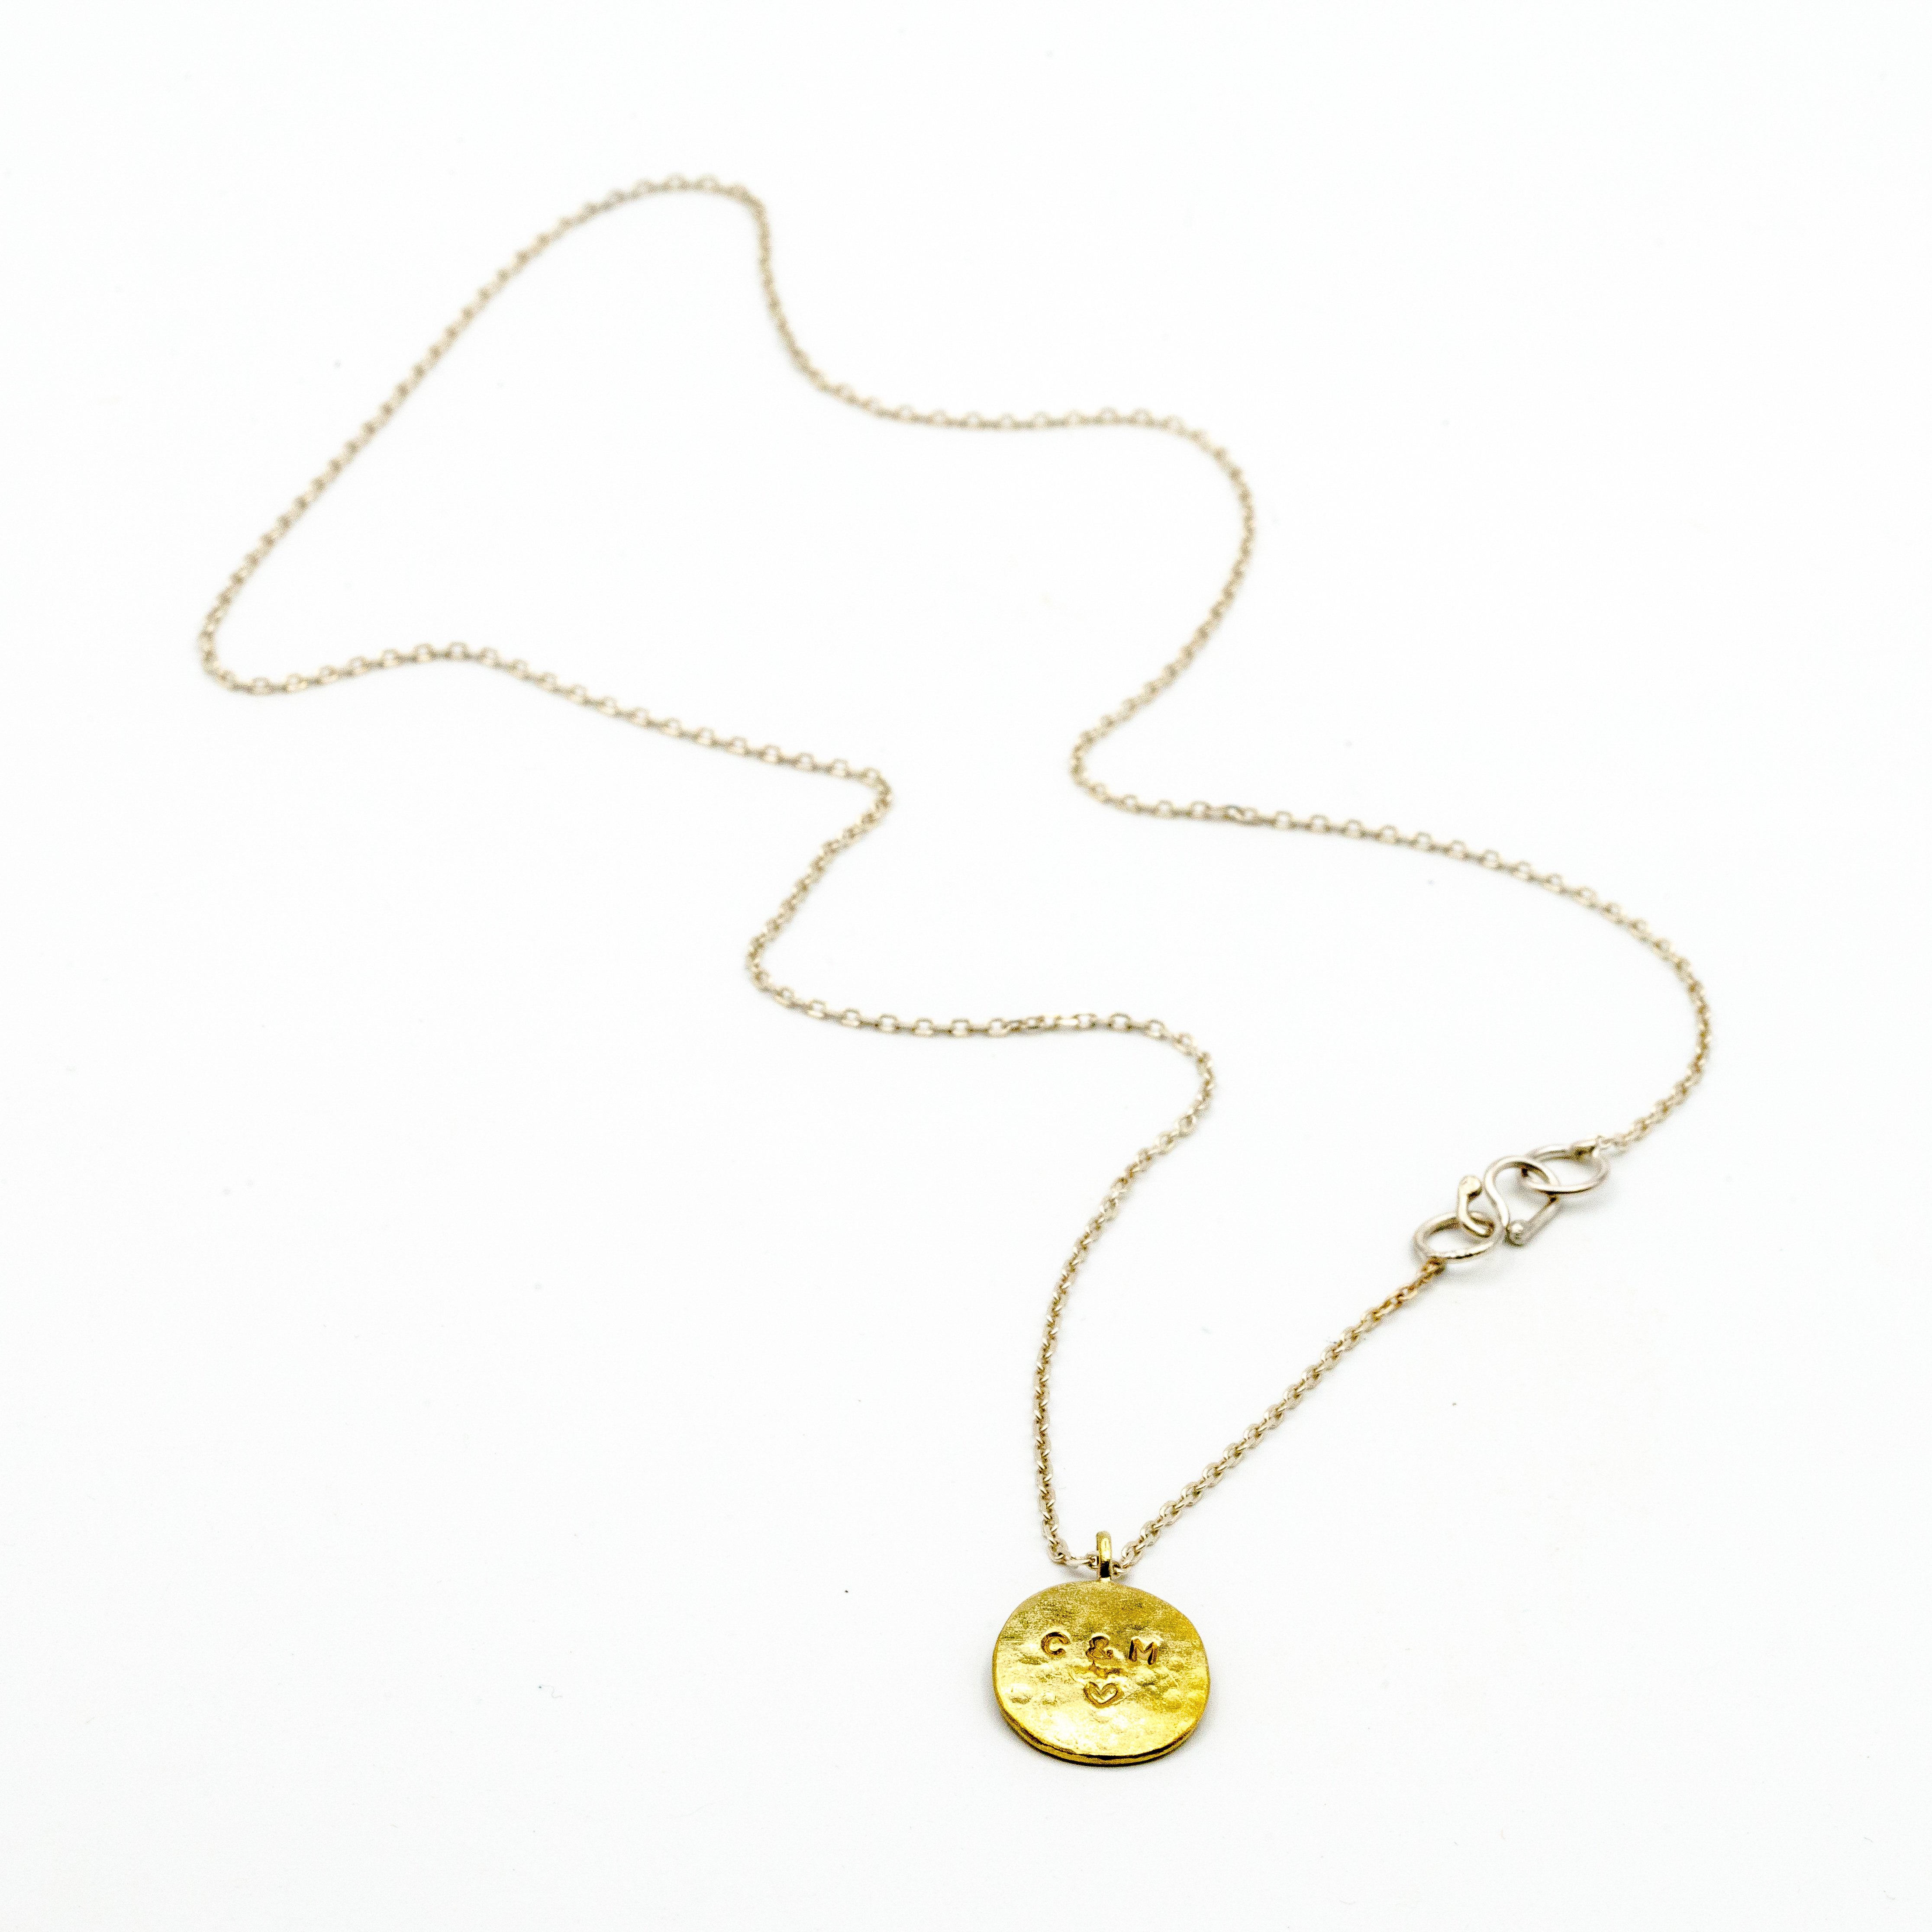 Brass circle pendant with sterling silver chain on white background